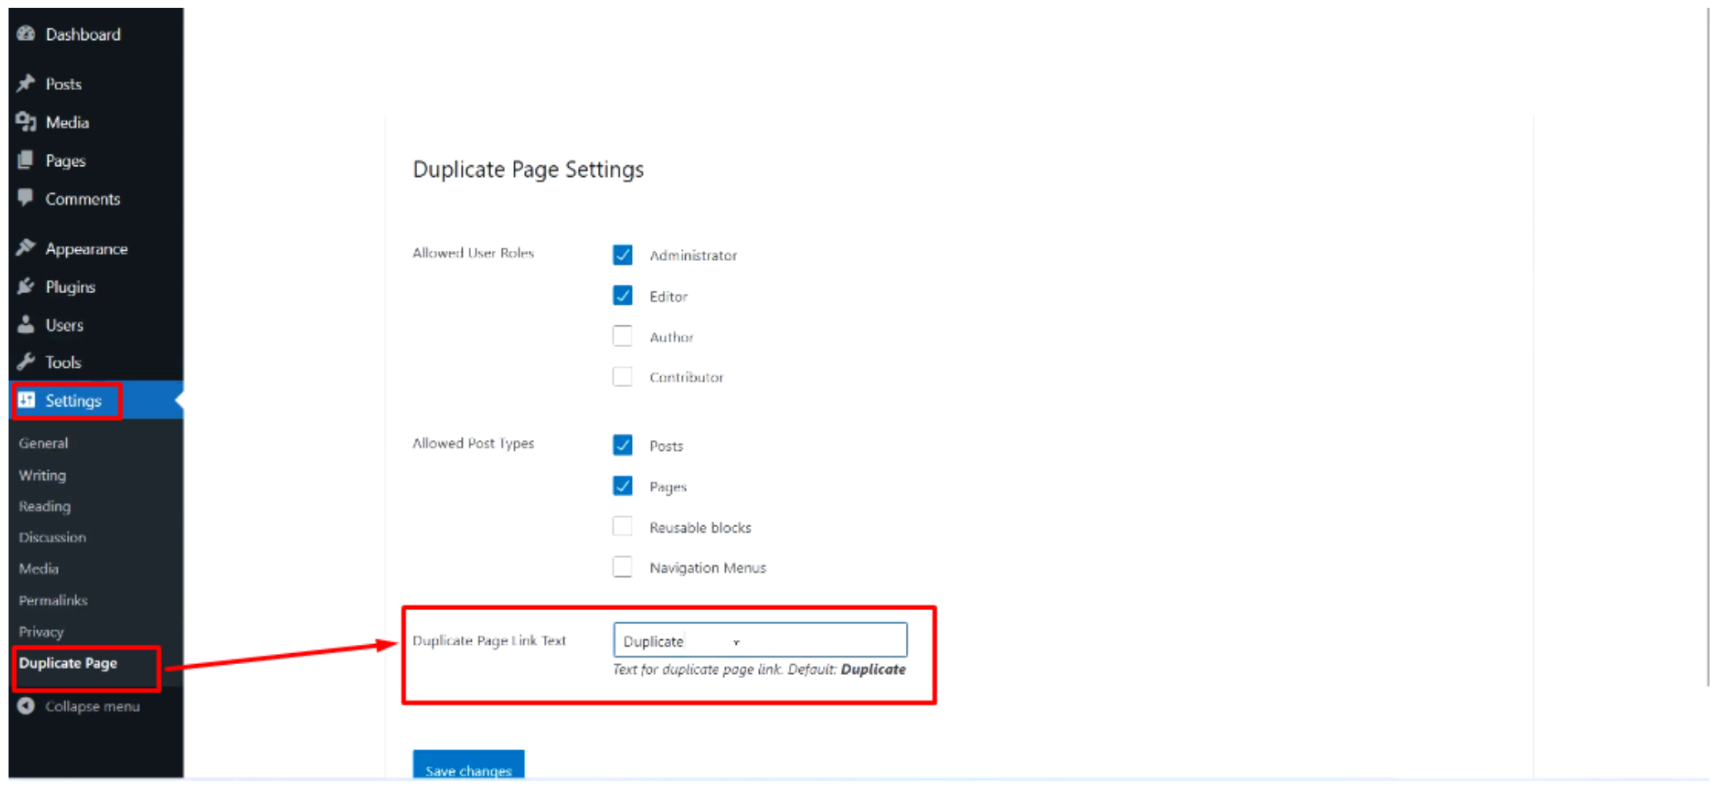 Now go to settings > WP Duplicate Page.